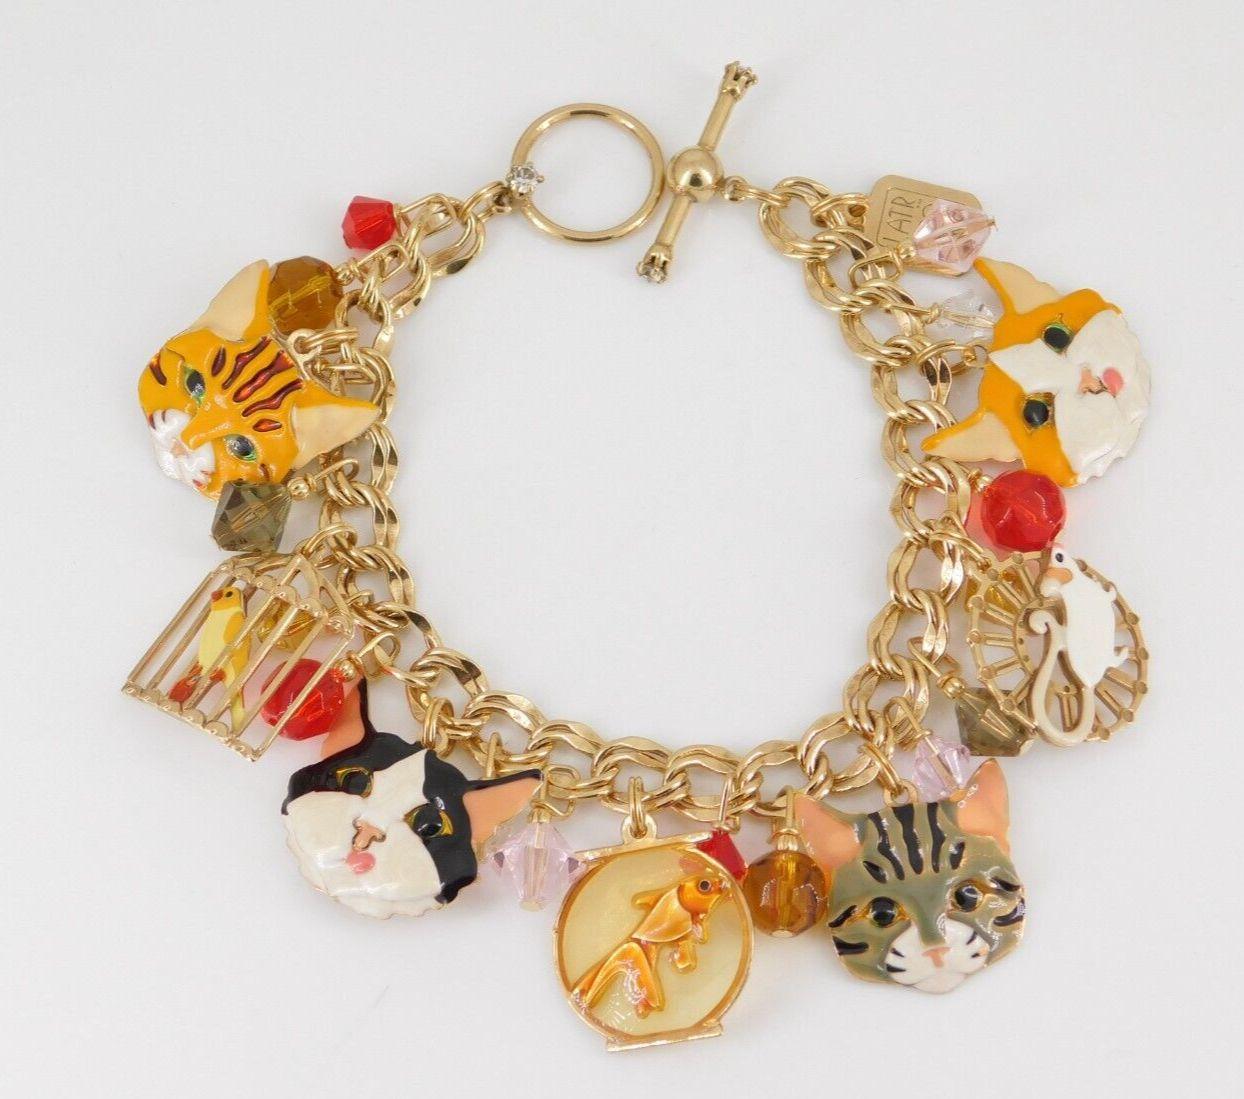 Simply Delightful! Vintage Statement Signed Lunch at the Ritz 2GO Hungry Tabby Cat Bracelet. Brimming with Multi Charms, featuring Enamel Cats, Bird in a Birdcage, Cat in a Fish Bowl and a Mouse on a Spin Wheel. Toggle clasp. Charms and beads vary